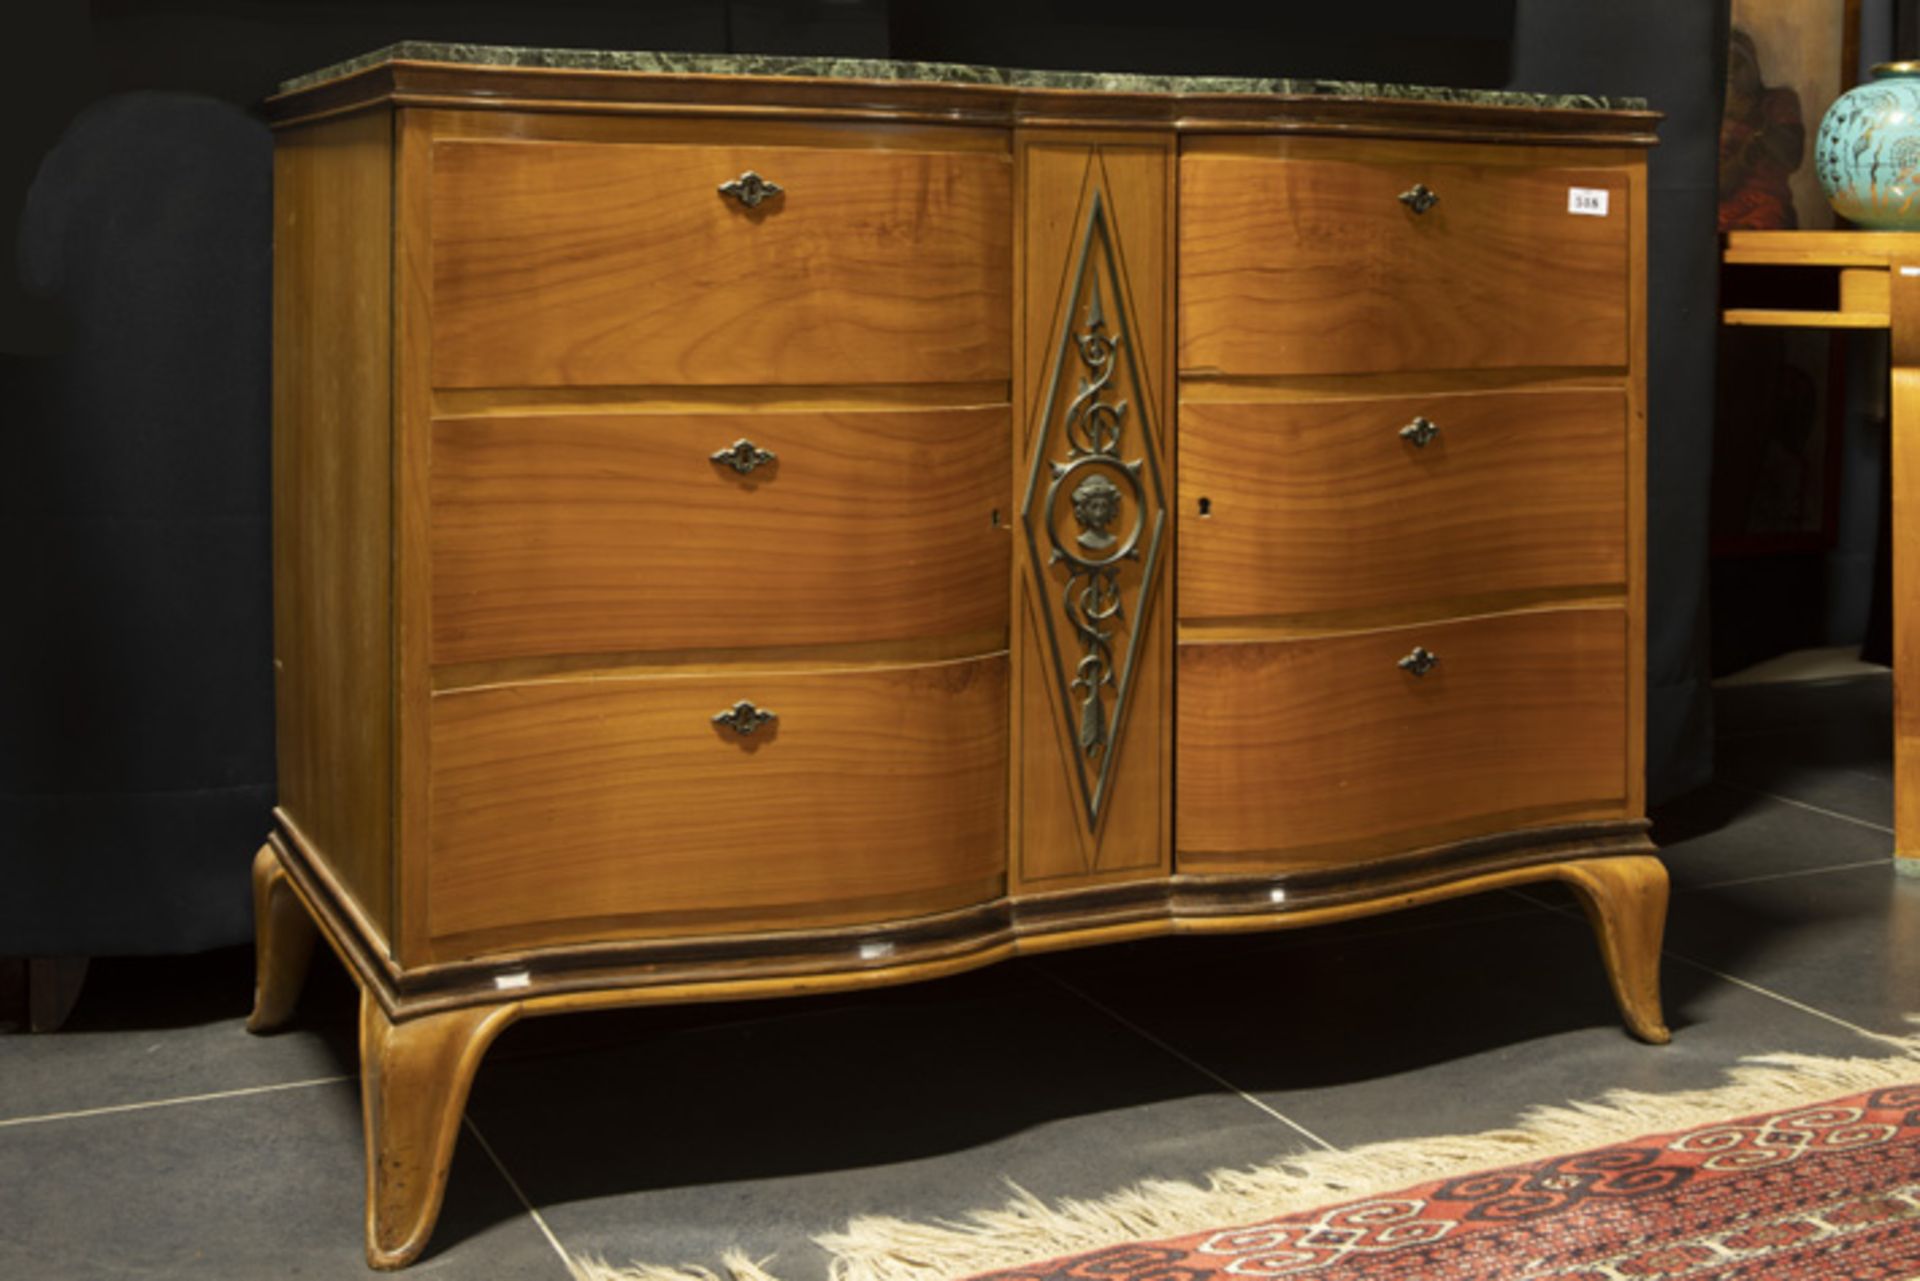 Belgian vintage chest of drawers in cherrywood with neoclassical mountings in bronze - attributed to